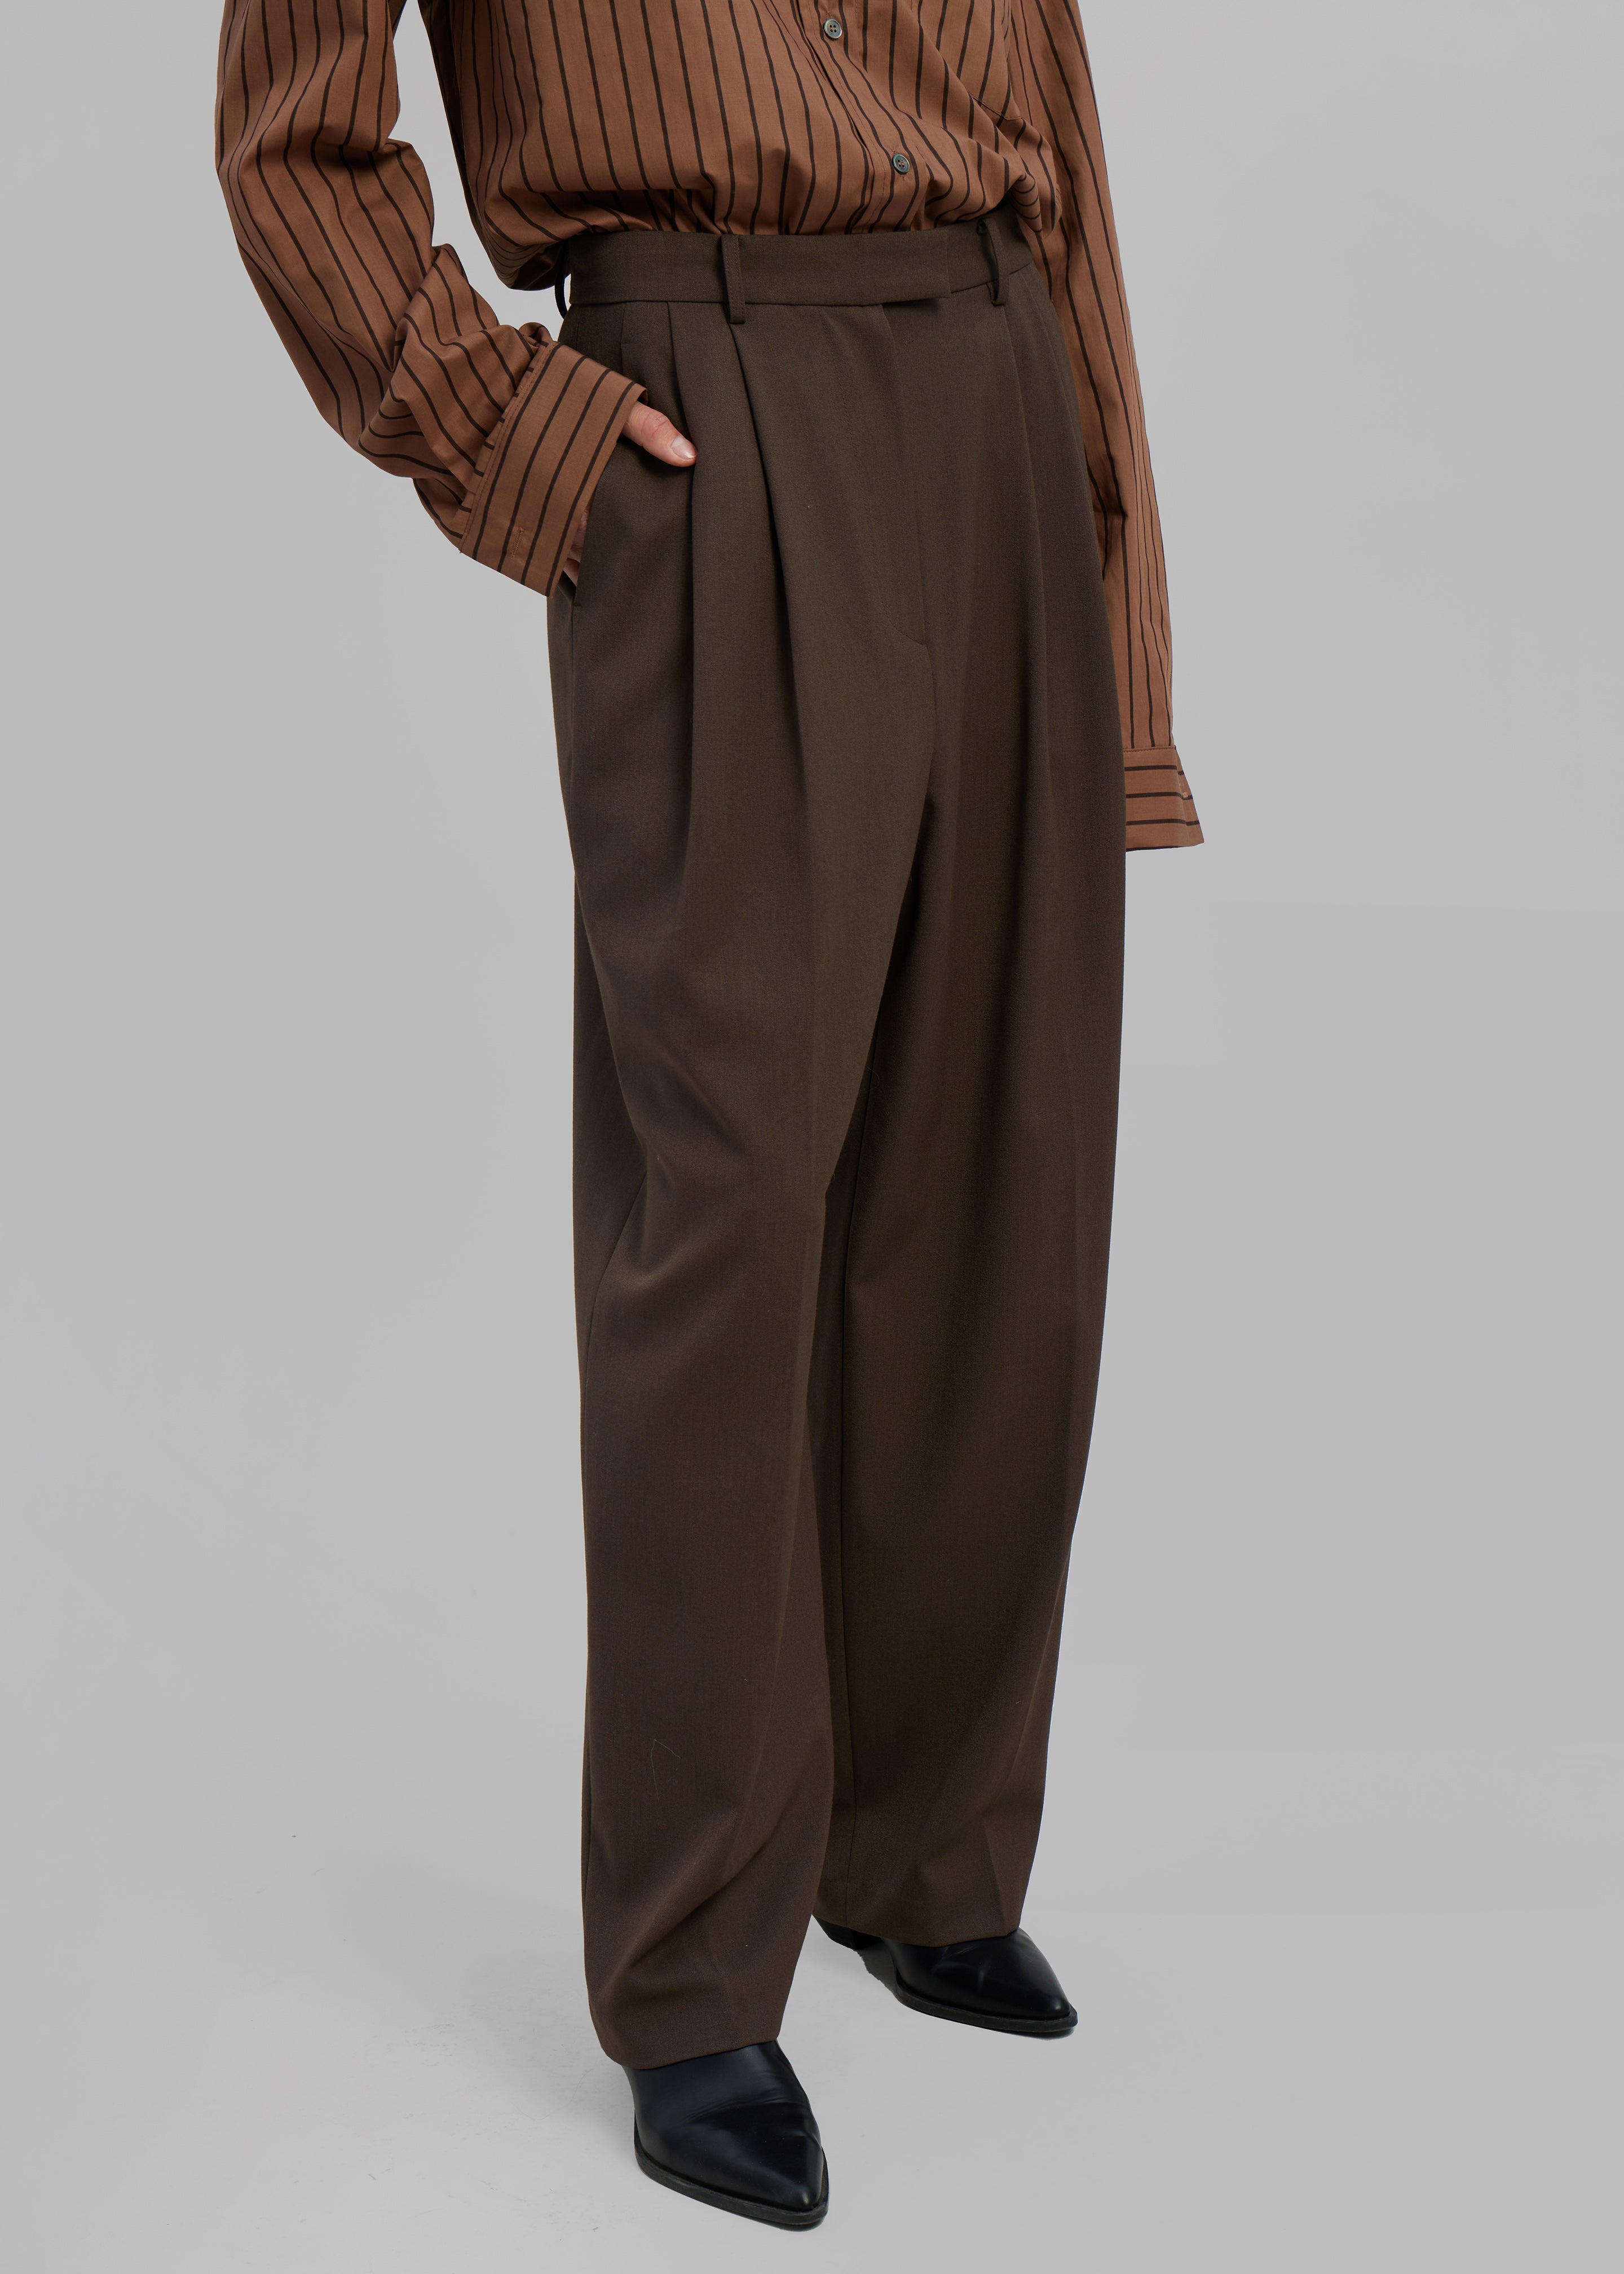 Aine Trousers - Brown - 2